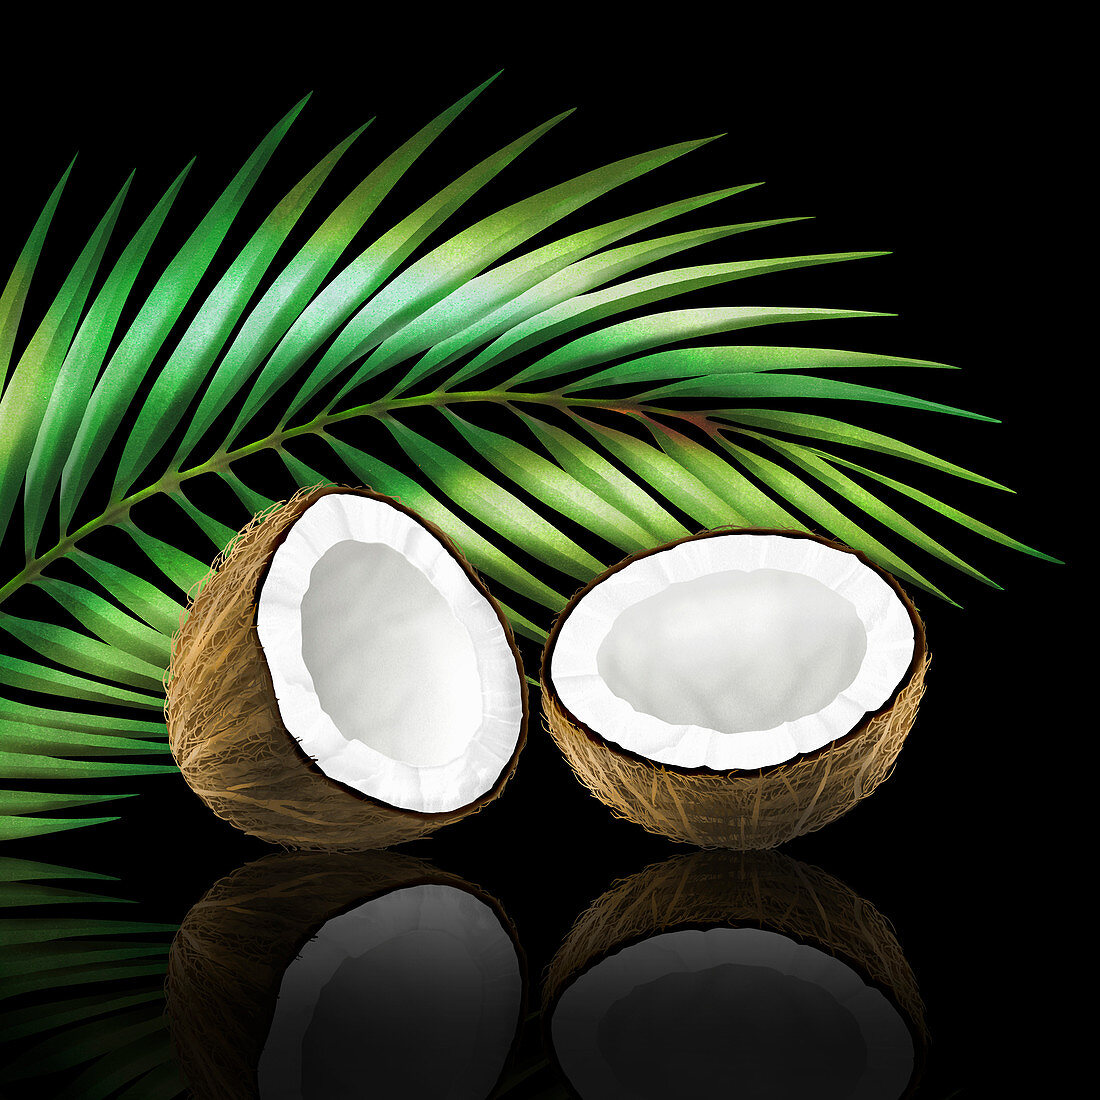 Coconut in two halves with coconut leaf, illustration